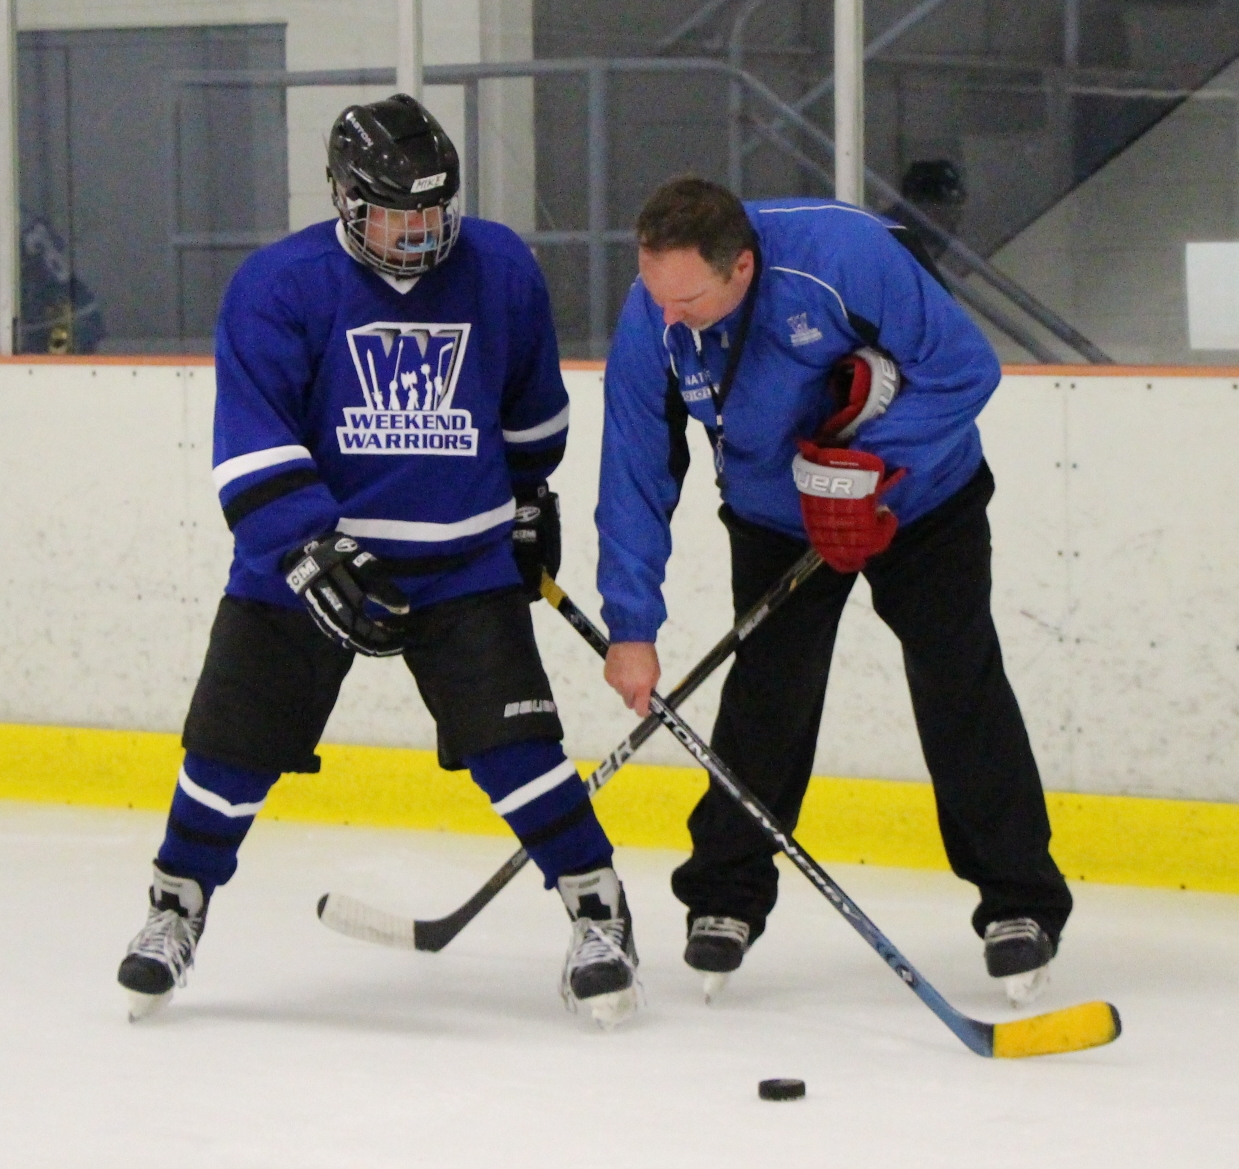 Coach Nate helps a player with stick handling